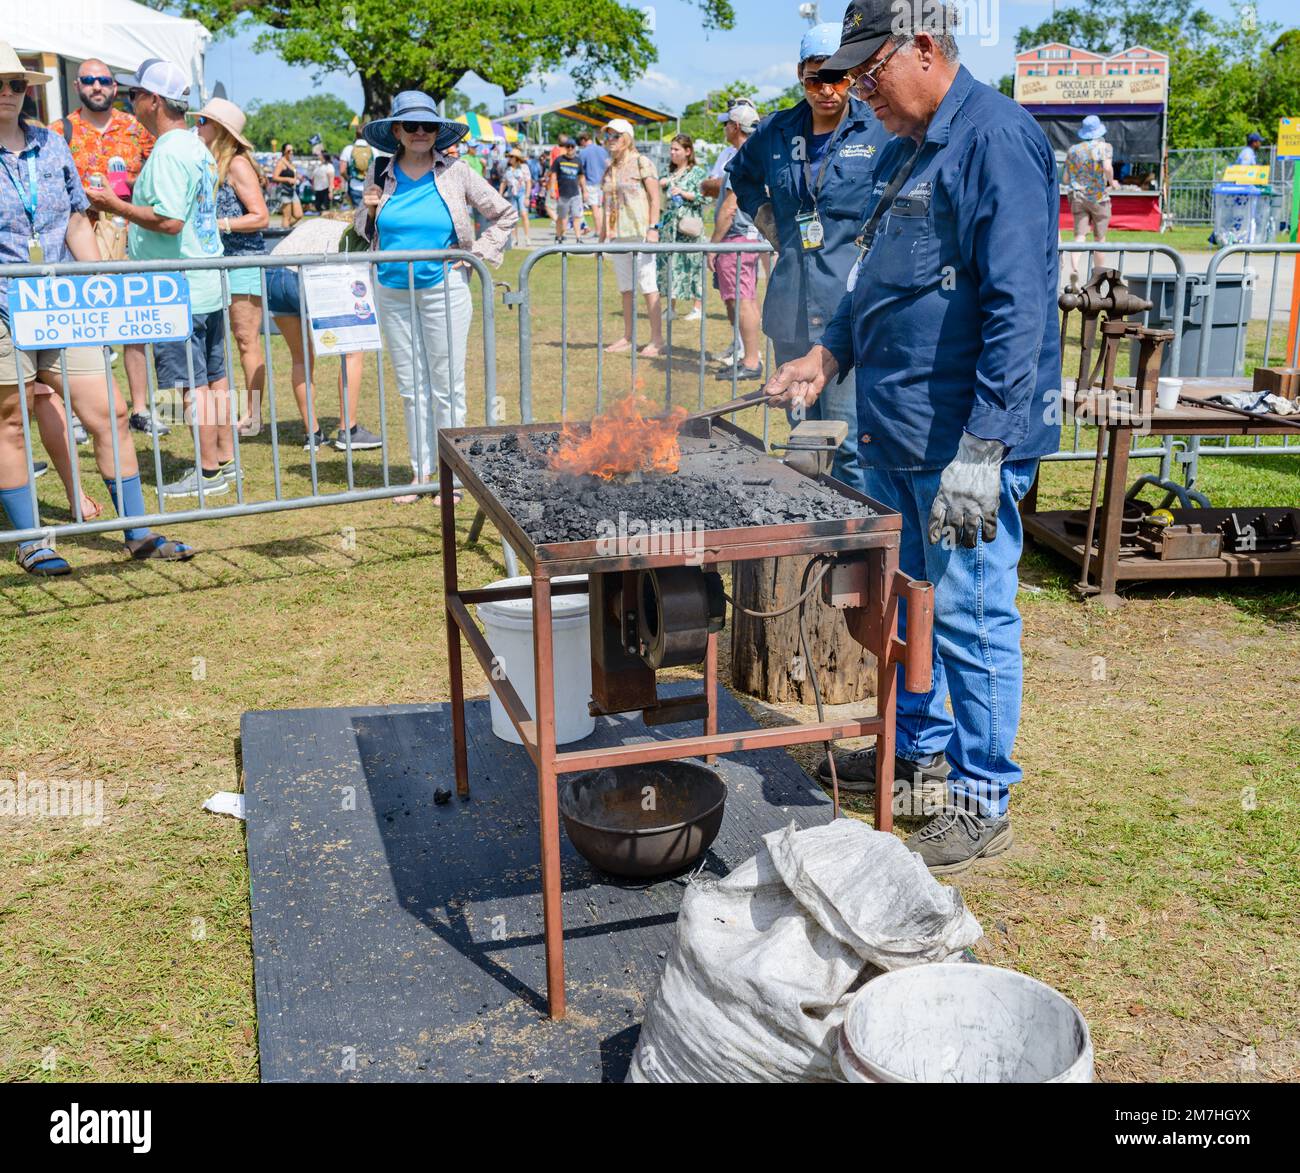 NEW ORLEANS, LA, USA - APRIL 29, 2022: Blacksmith demonstrating the toolmaking craft at the New Orleans Jazz and Heritage Festival Stock Photo